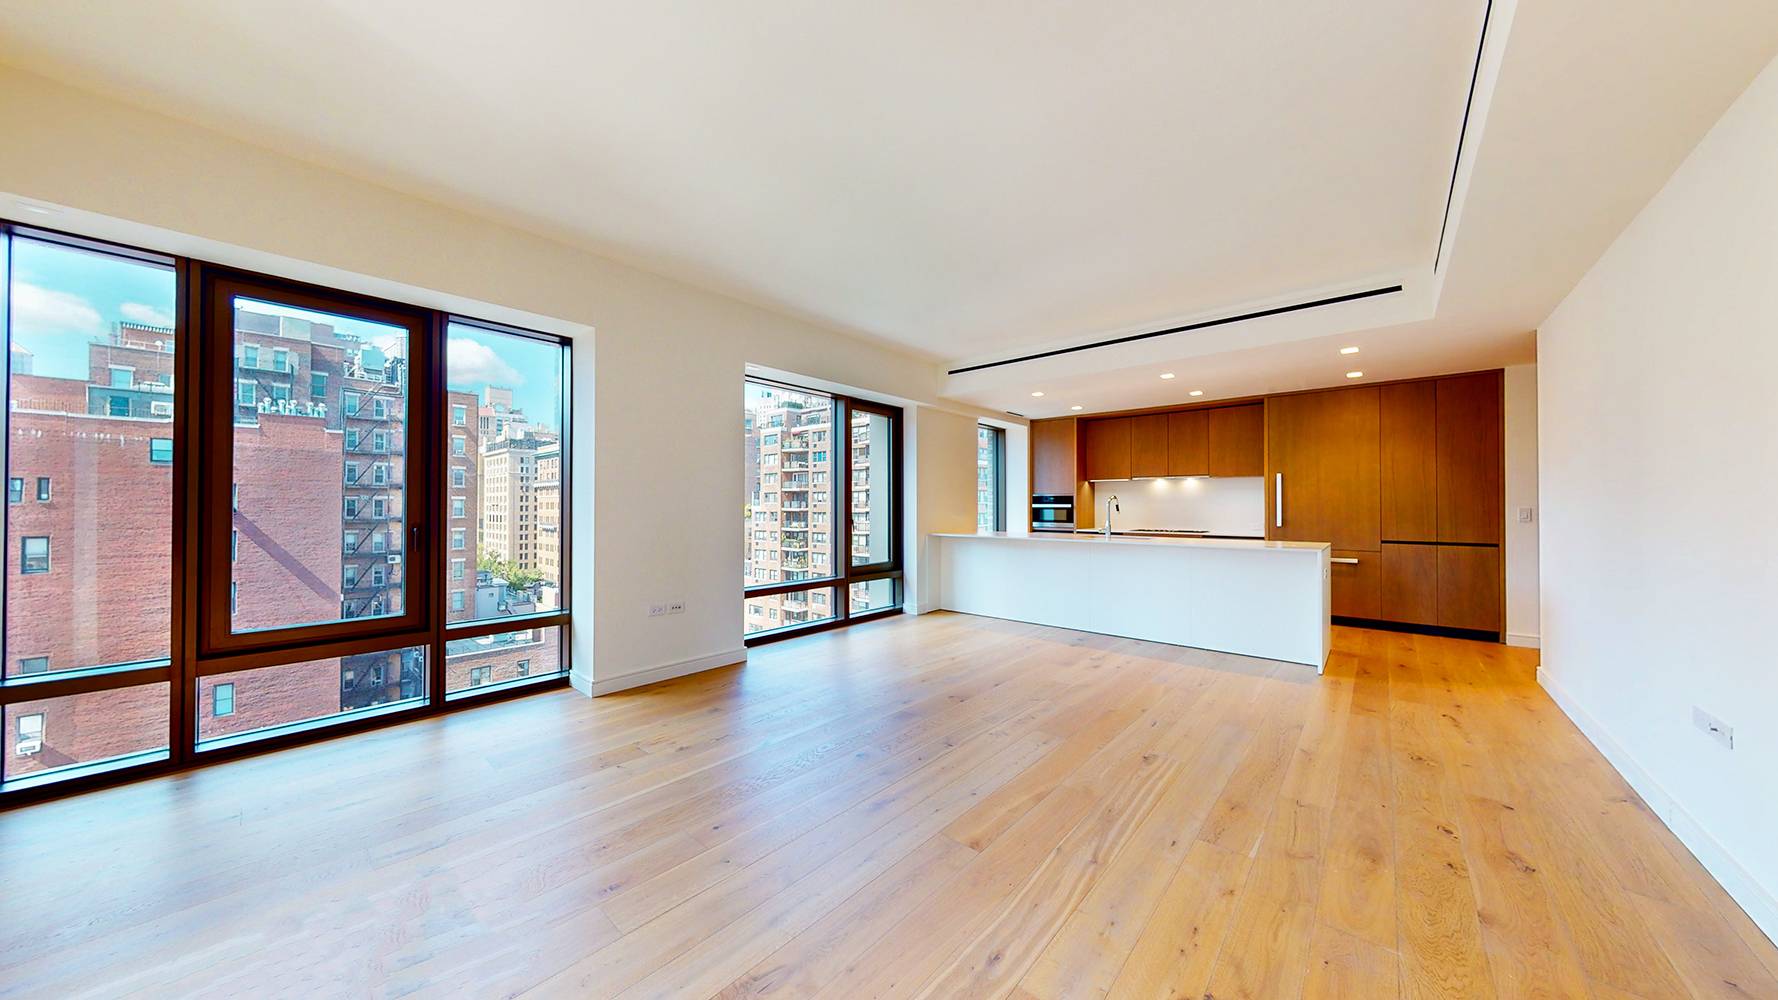 11A at 200 East 21st Street is a stunning 1, 429 square foot 2 bedroom, 2 bath home with striking views and beautiful light streaming in from Southern, Western, and ...